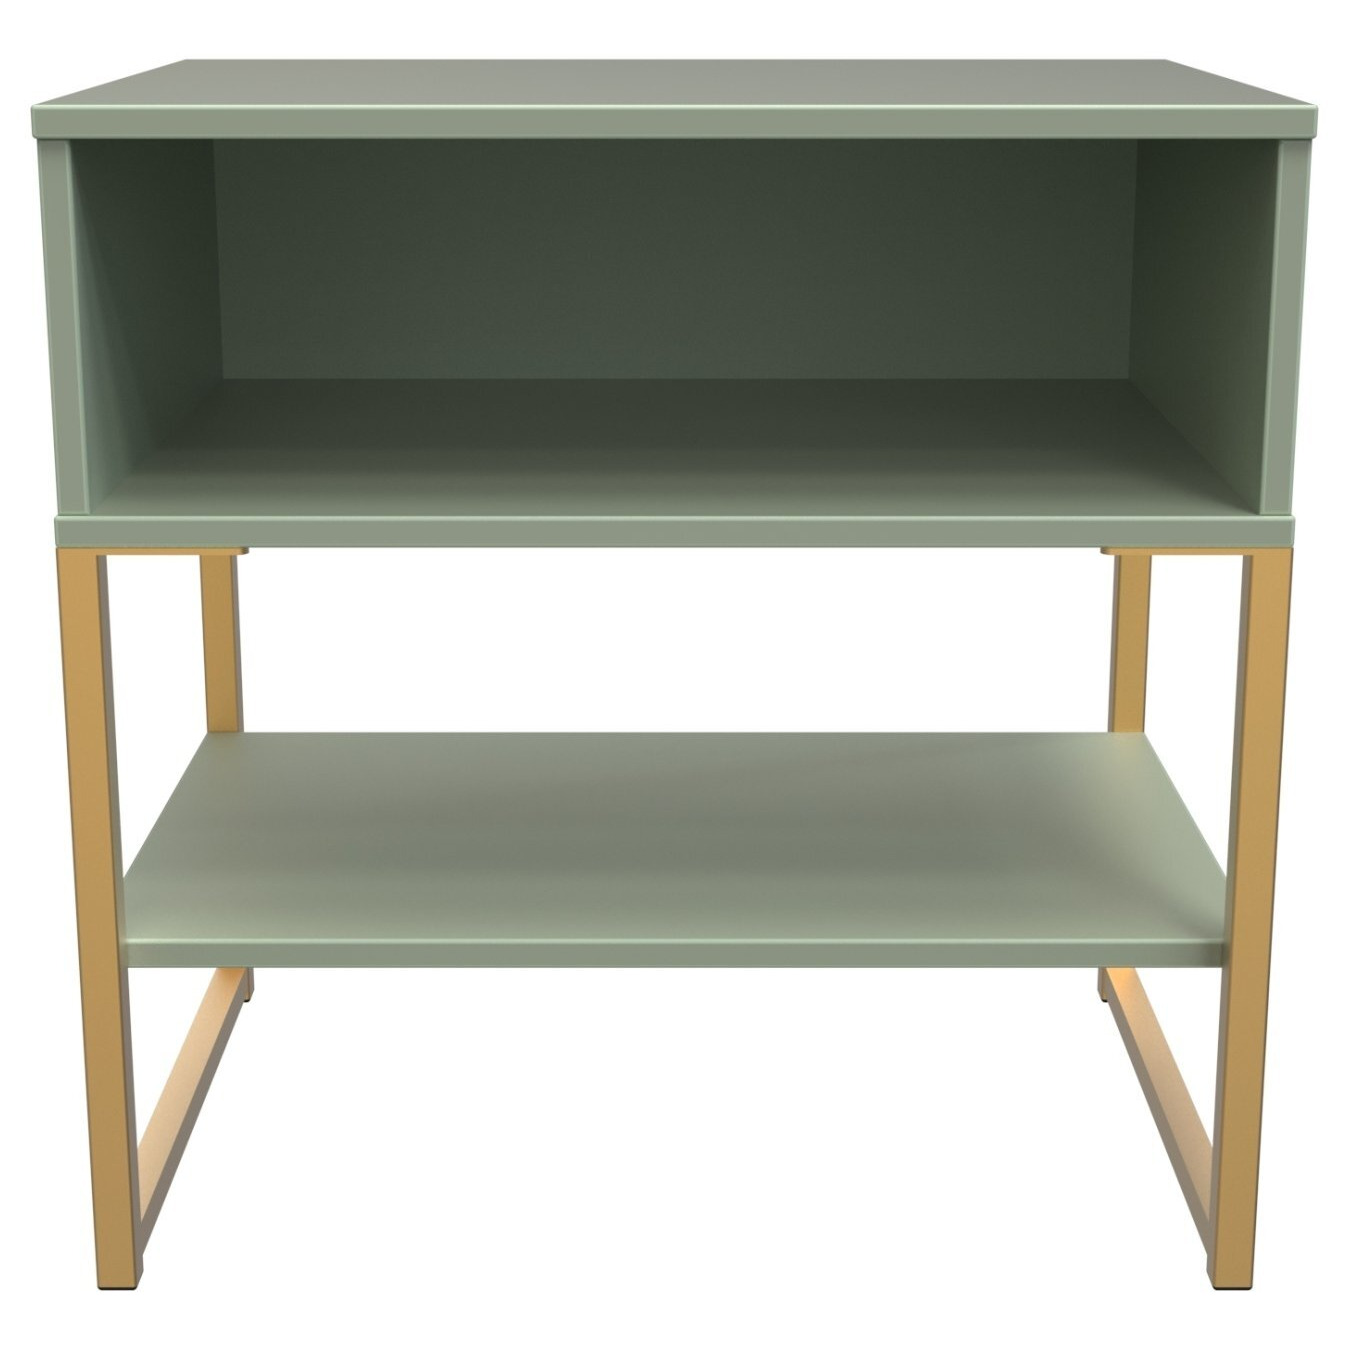 Messina Bedside Table - Green - image 1